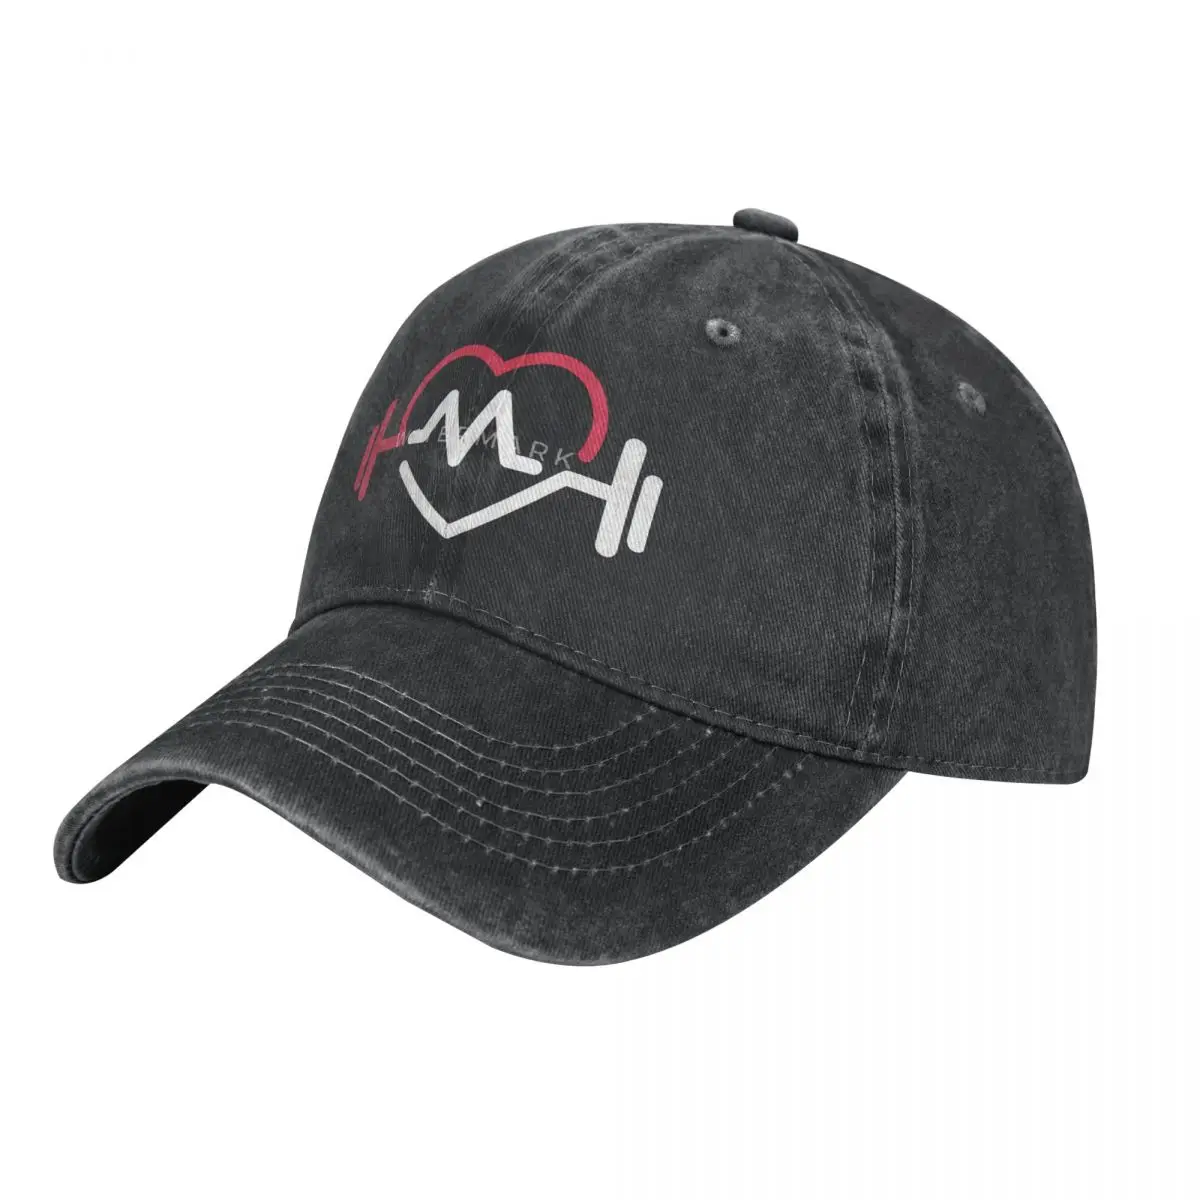 

Fitness Logo - I Love - Heartbeat Casquette, Cotton Cap Customizable Hat Wicking Adjustable Cap Nice Gift